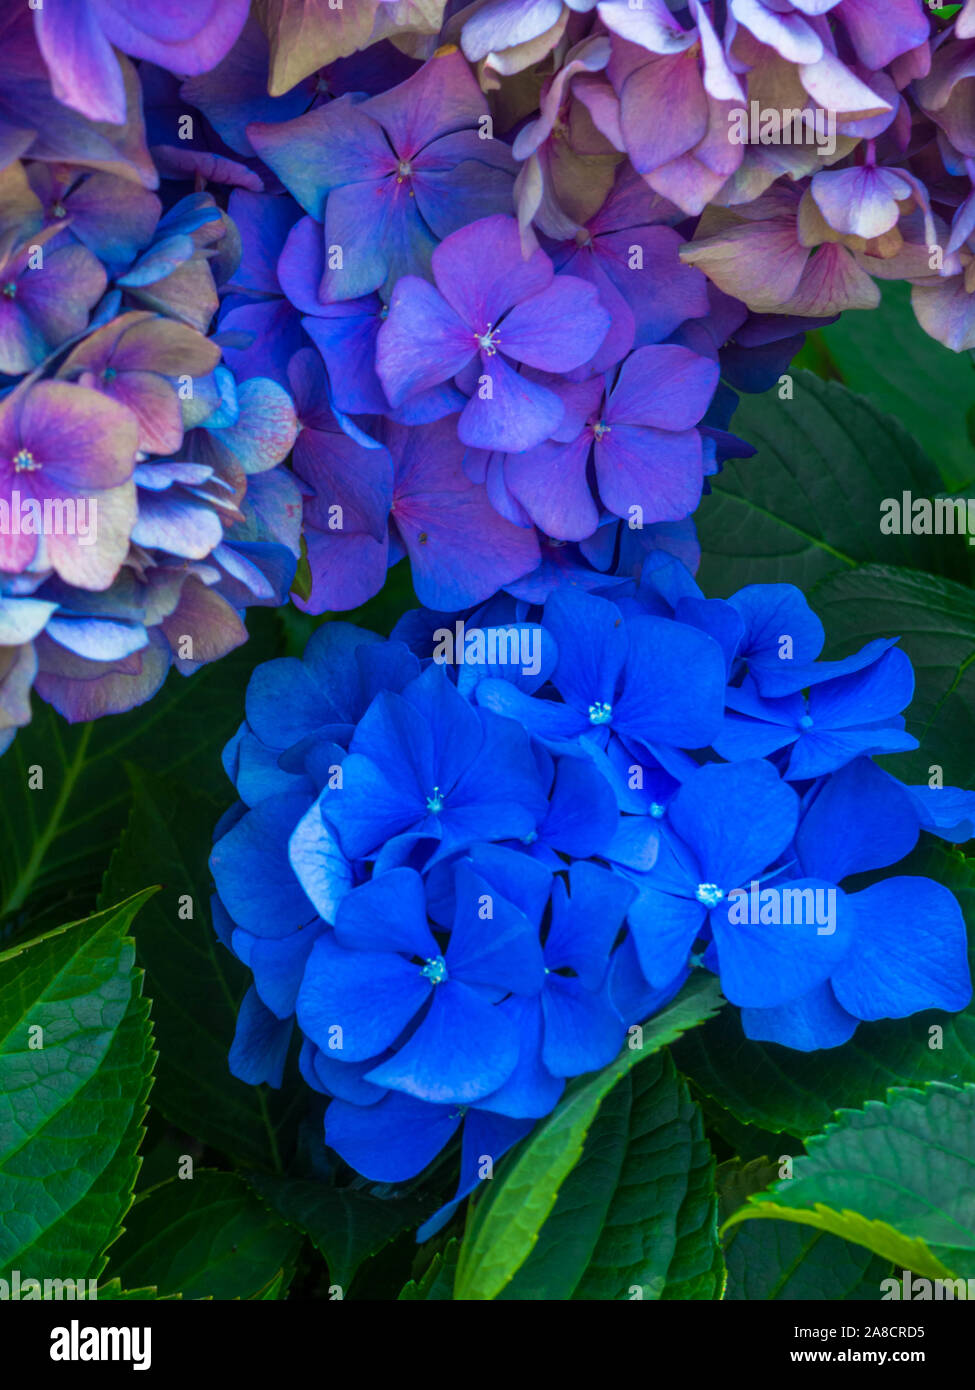 Blue Hydrangea macrophylla or Hortensia flower with variations color blue  to purple. Selective focus Stock Photo - Alamy